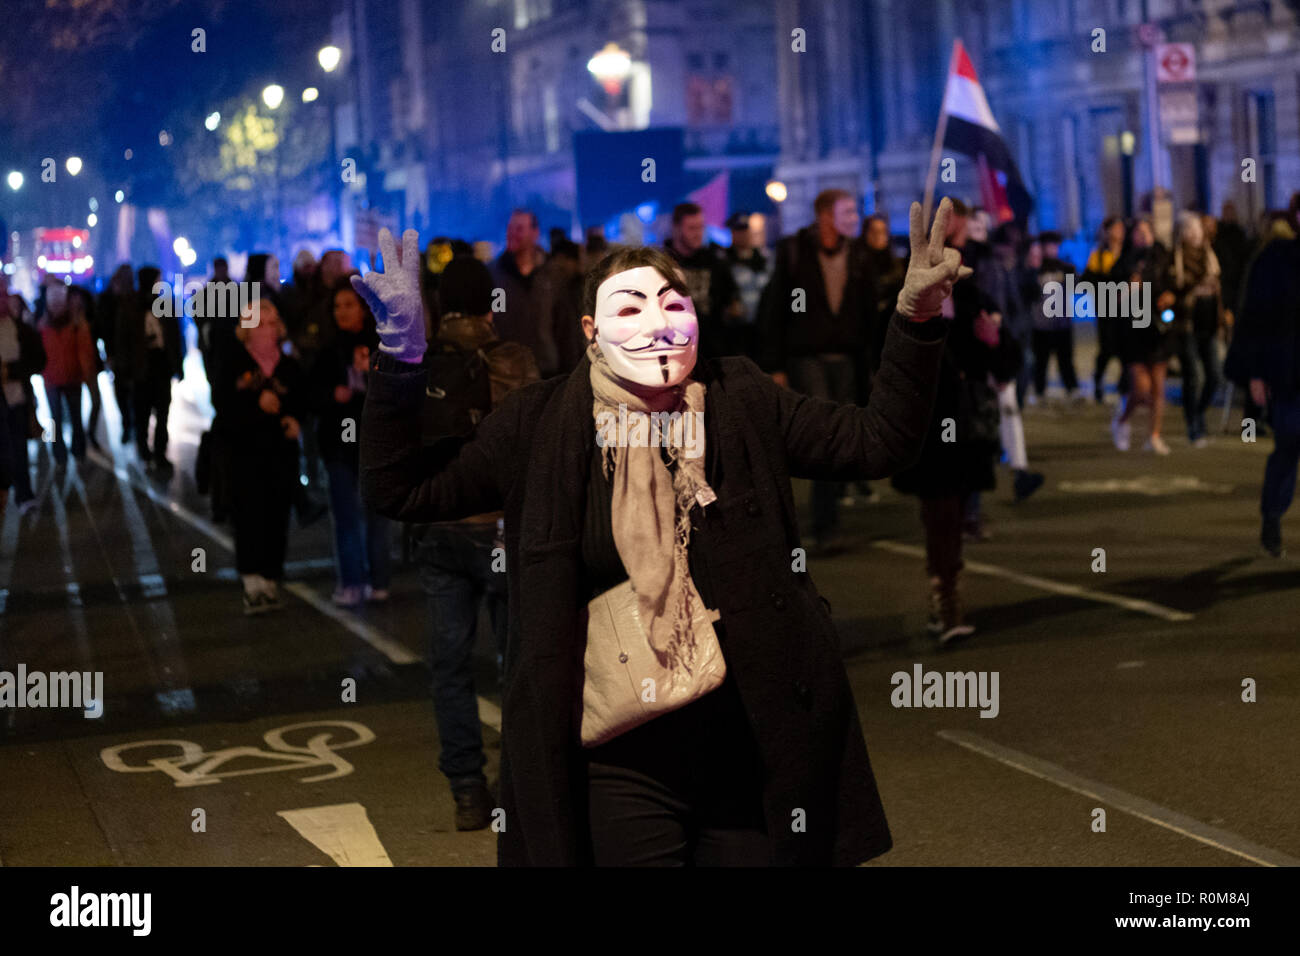 London, UK. 5th Nov 2018. Million Mask March rally in central London on the 5th November 2018 with Anonymus supporters wearing the iconic Guy Fawkes mask. Credit: Giovanni Strondl/Alamy Live News Stock Photo